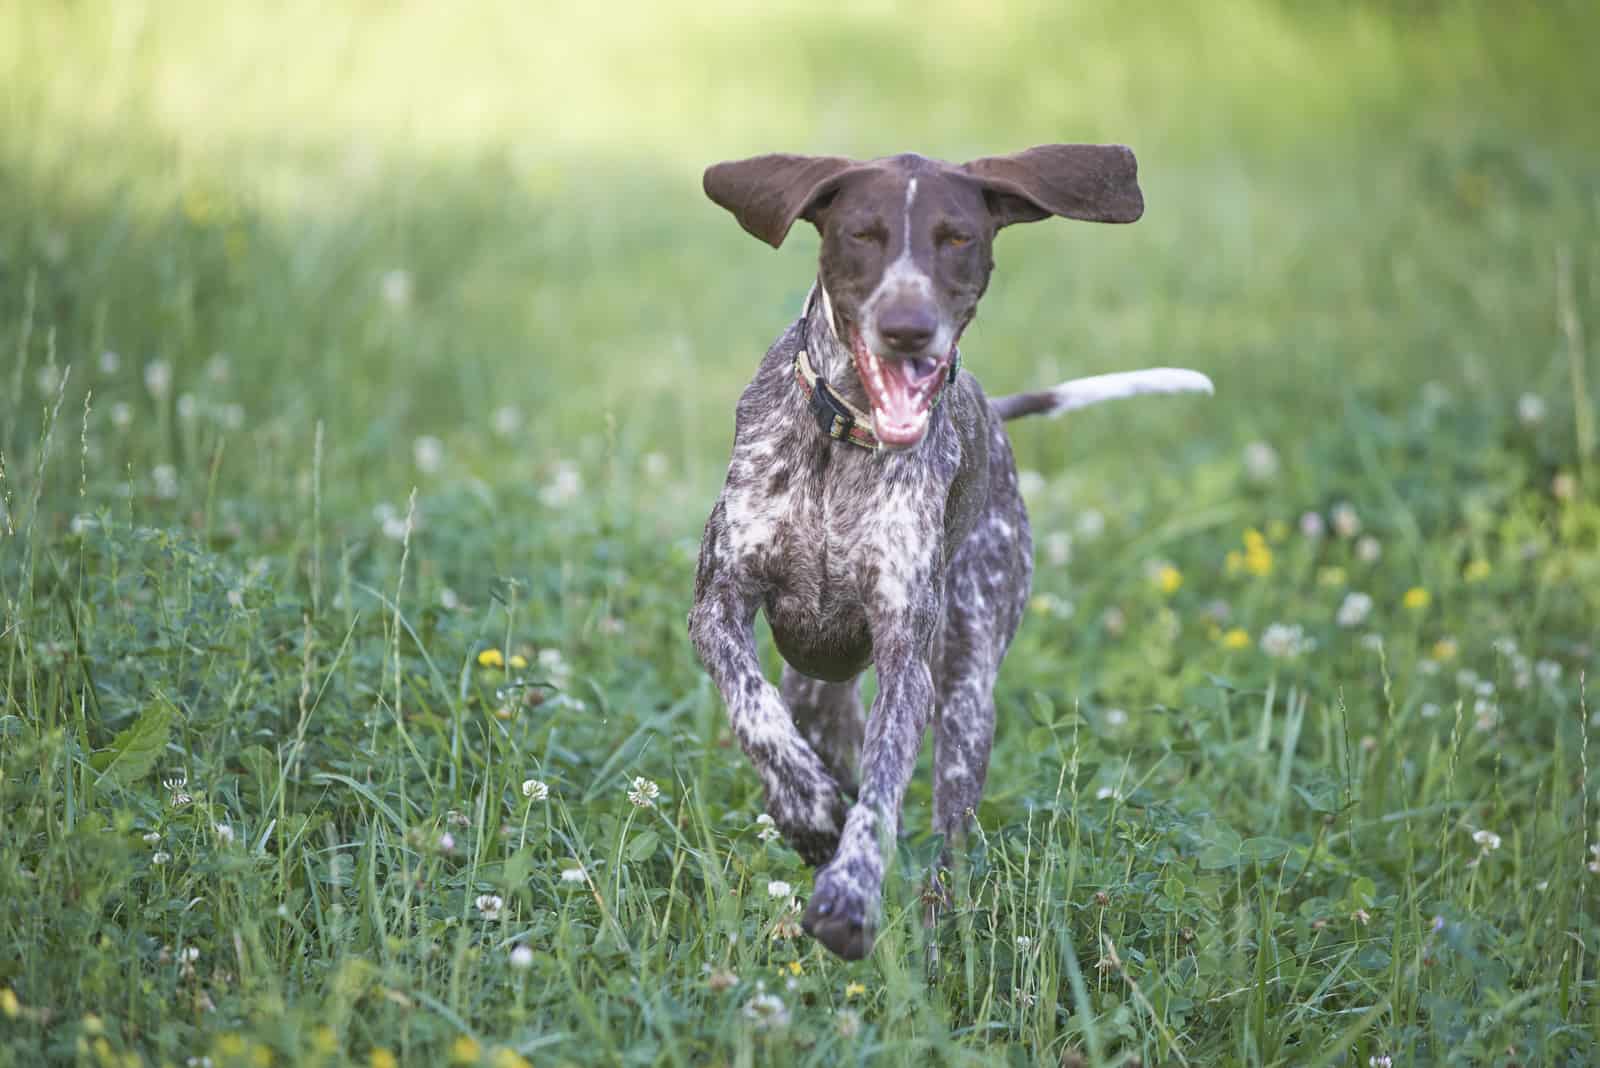 German Shorthaired Pointer runs on the grass